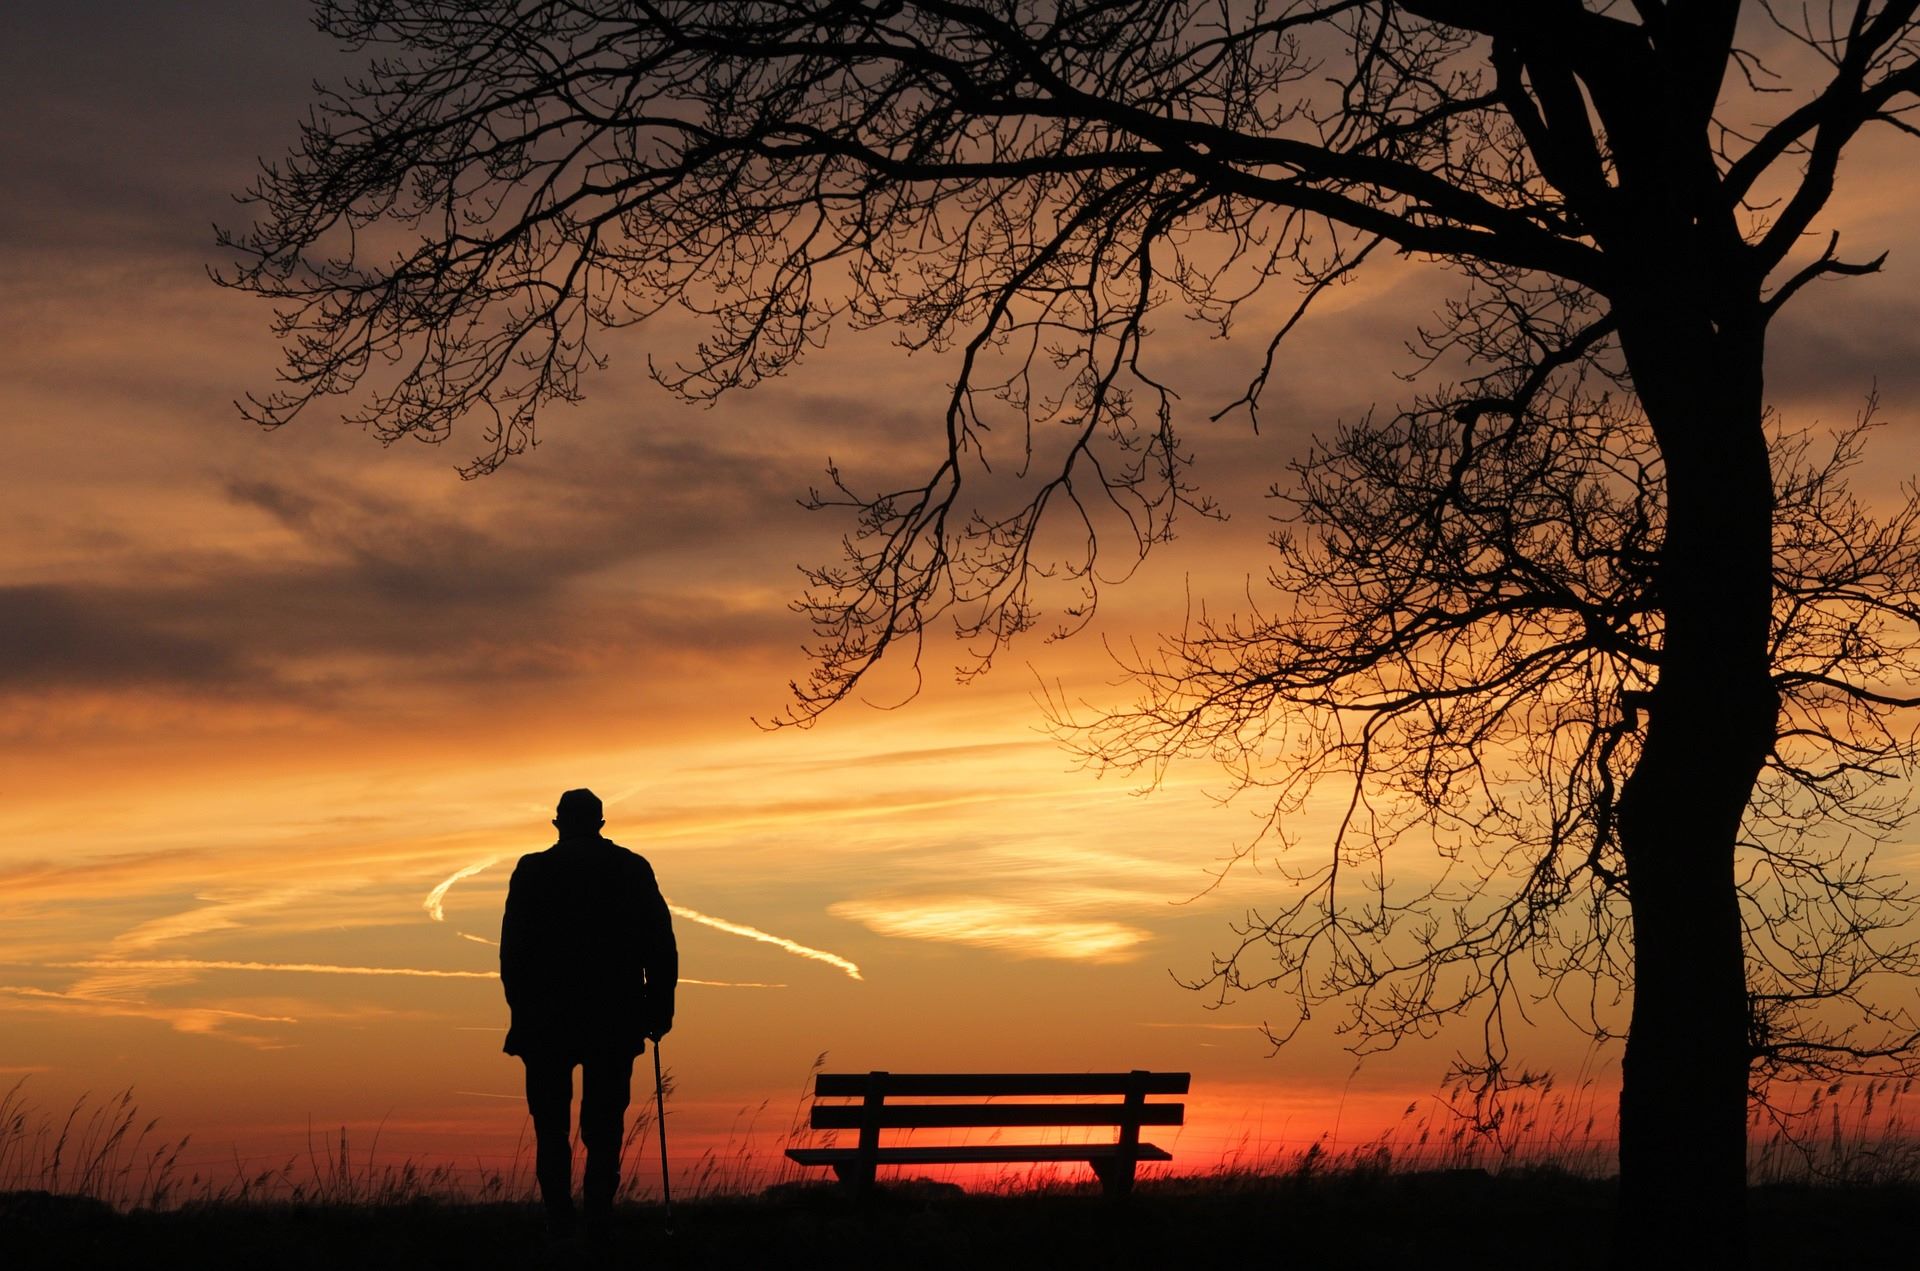 Man and cane, bench and tree, sunset